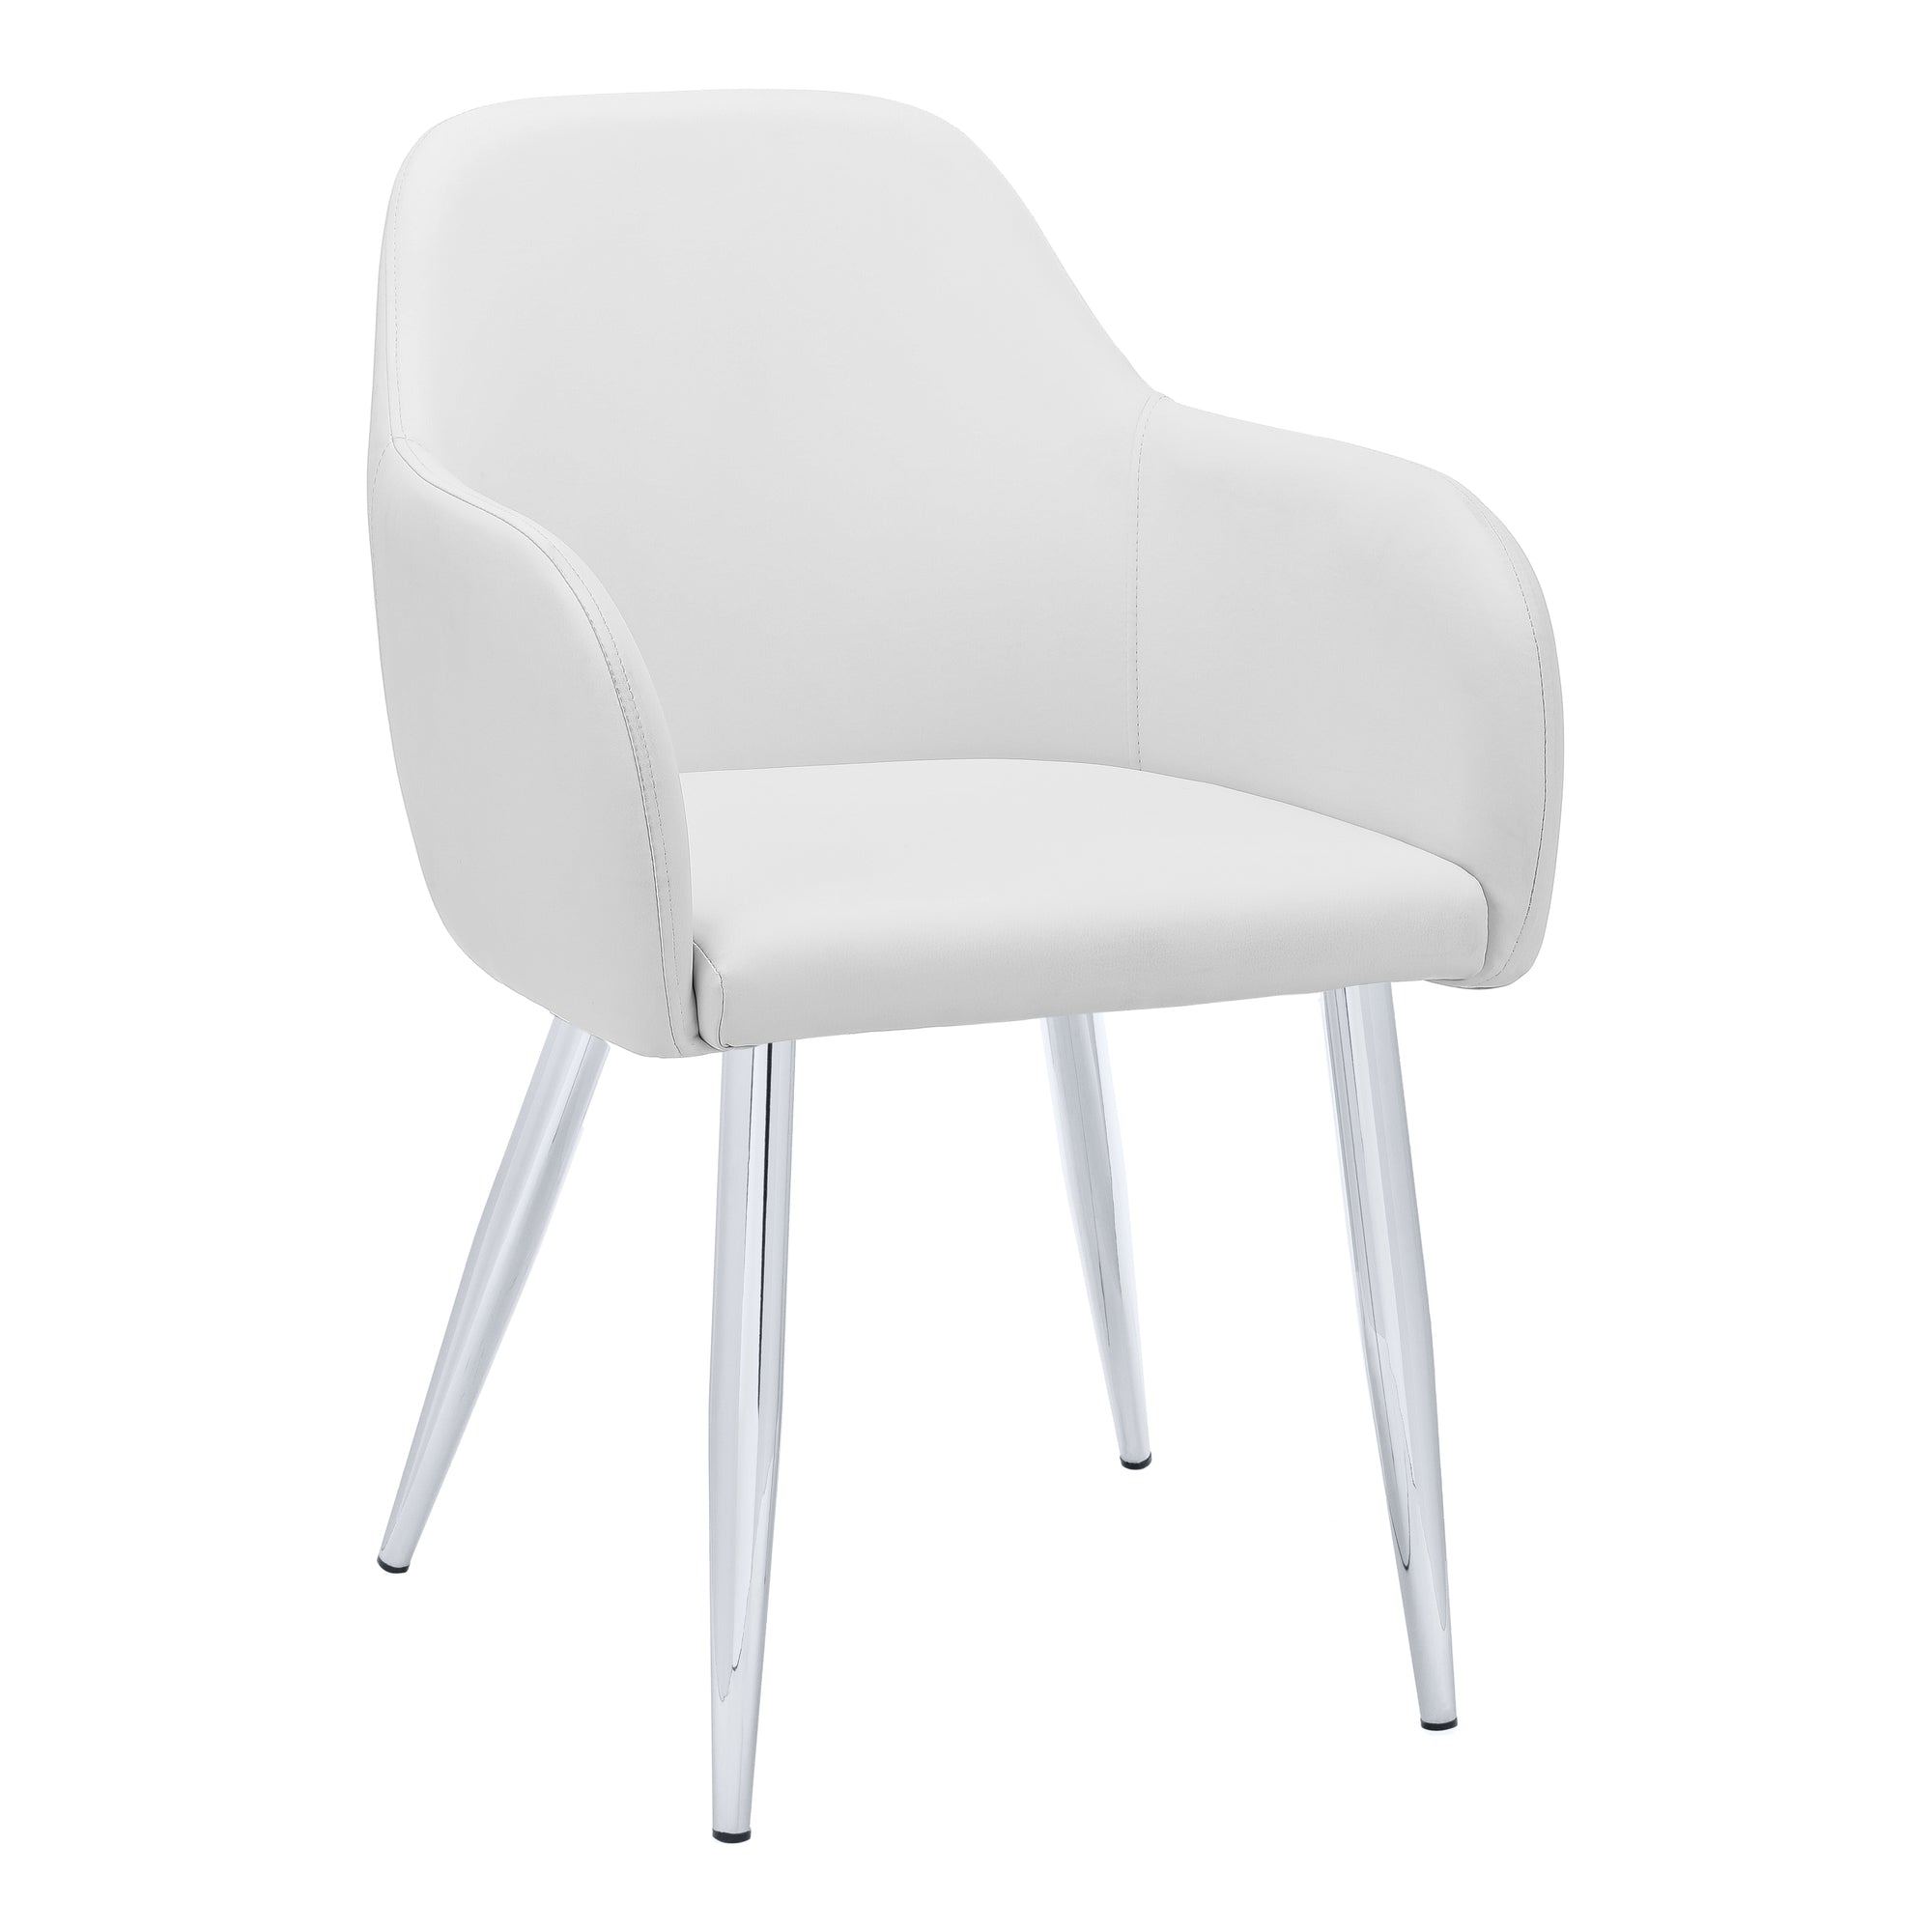 Mullan Luxury High-Arm Dining Chair With Chrome Finished Legs (Set of 2 - White)